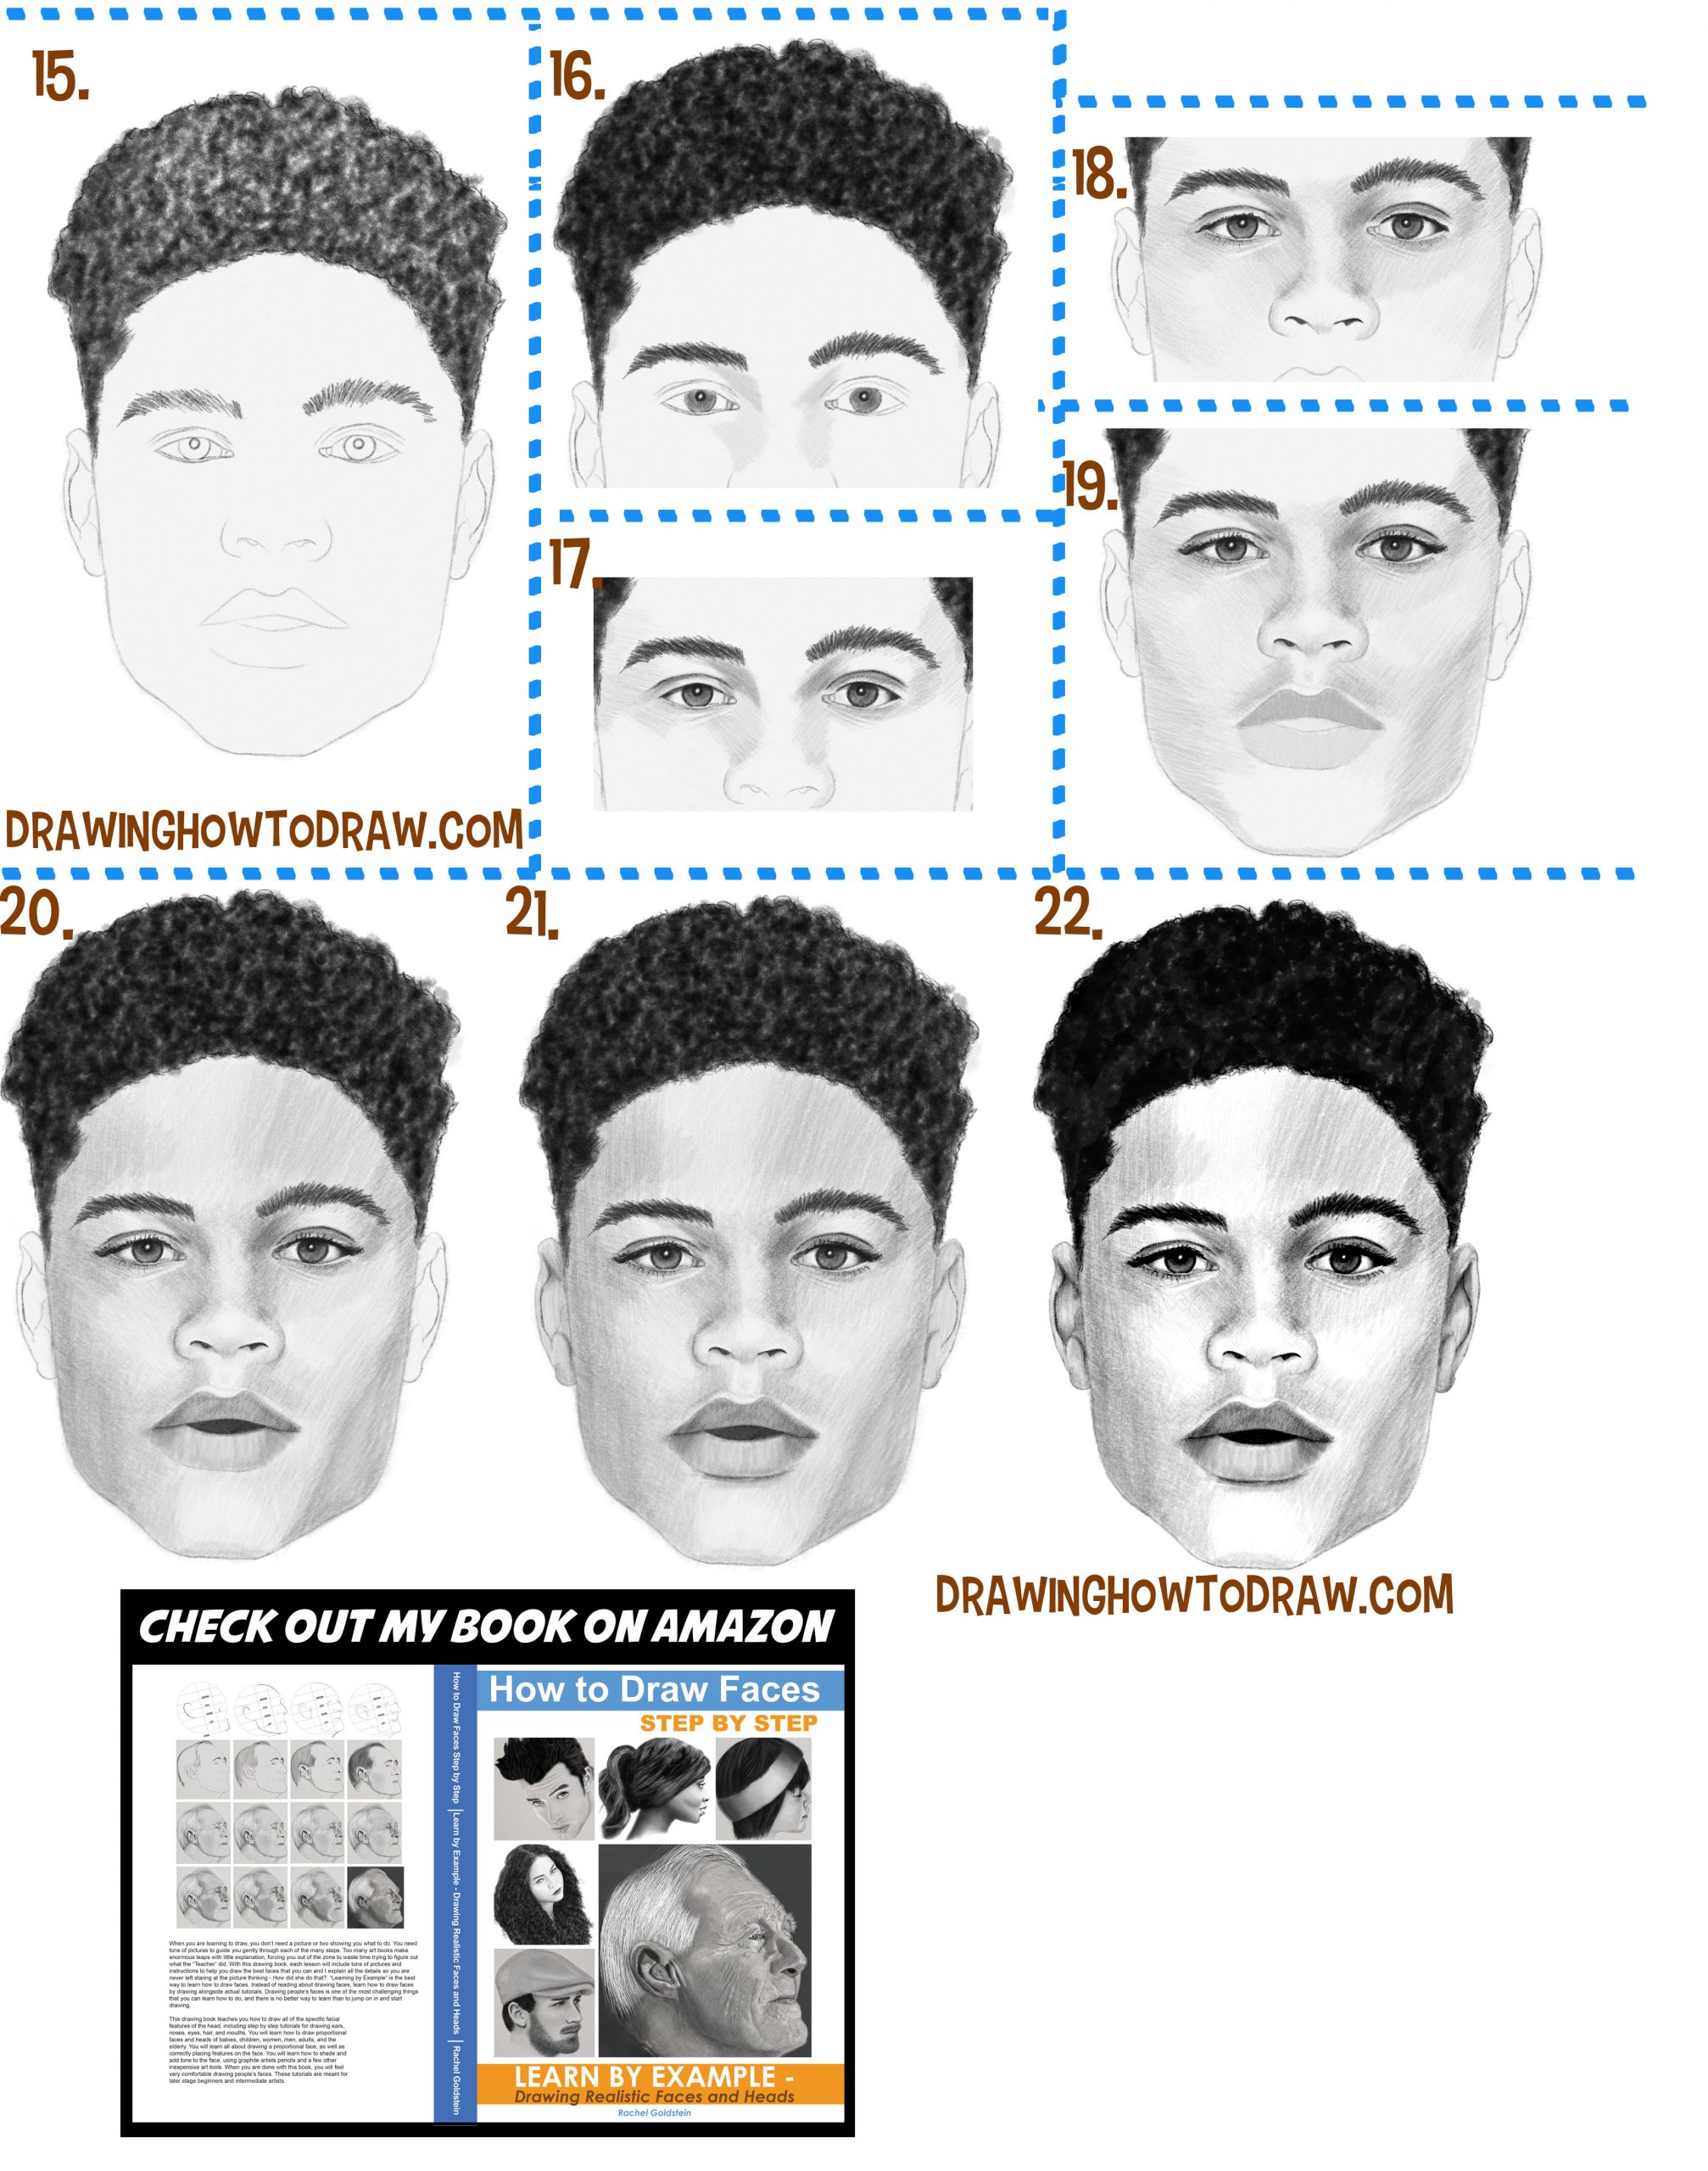 How To Draw A Black Man S Face From The Front View Easy Step By Step Drawing Tutorial How To Draw Step By Step Drawing Tutorials